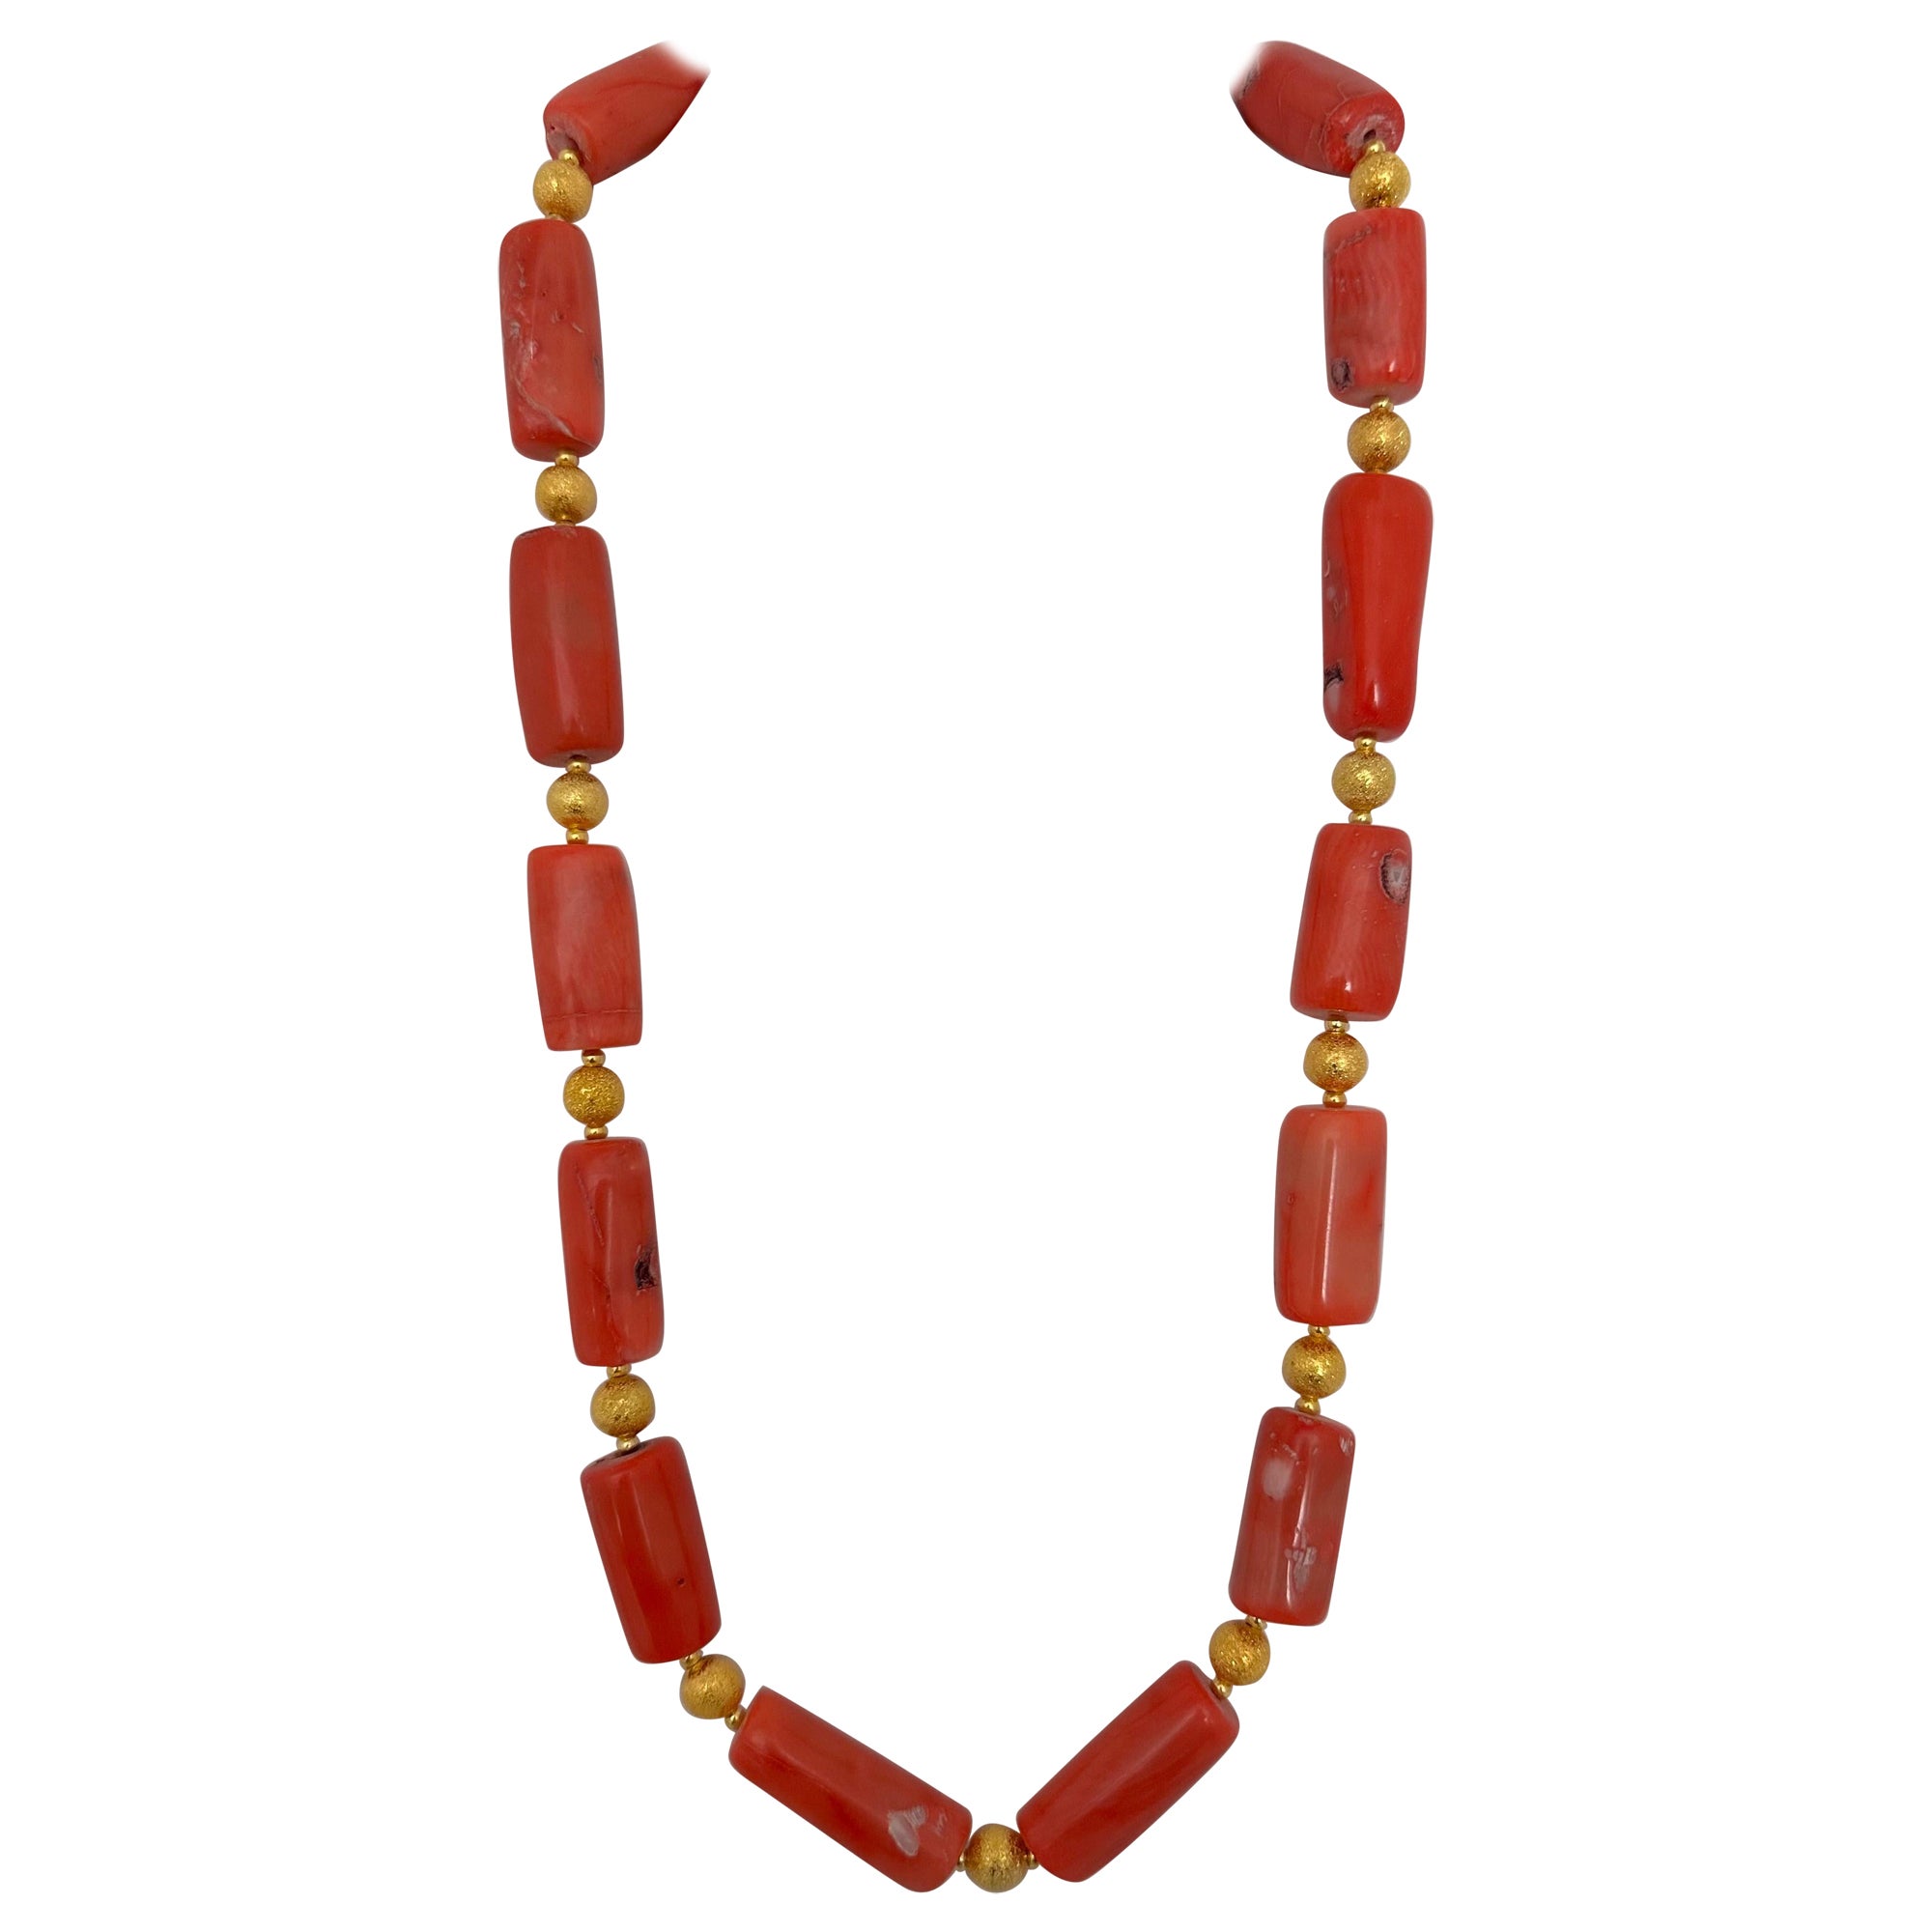 Handmade Gold Plated Beads & Salmon Barrel Shape Coral Beaded 25" Necklace #C37